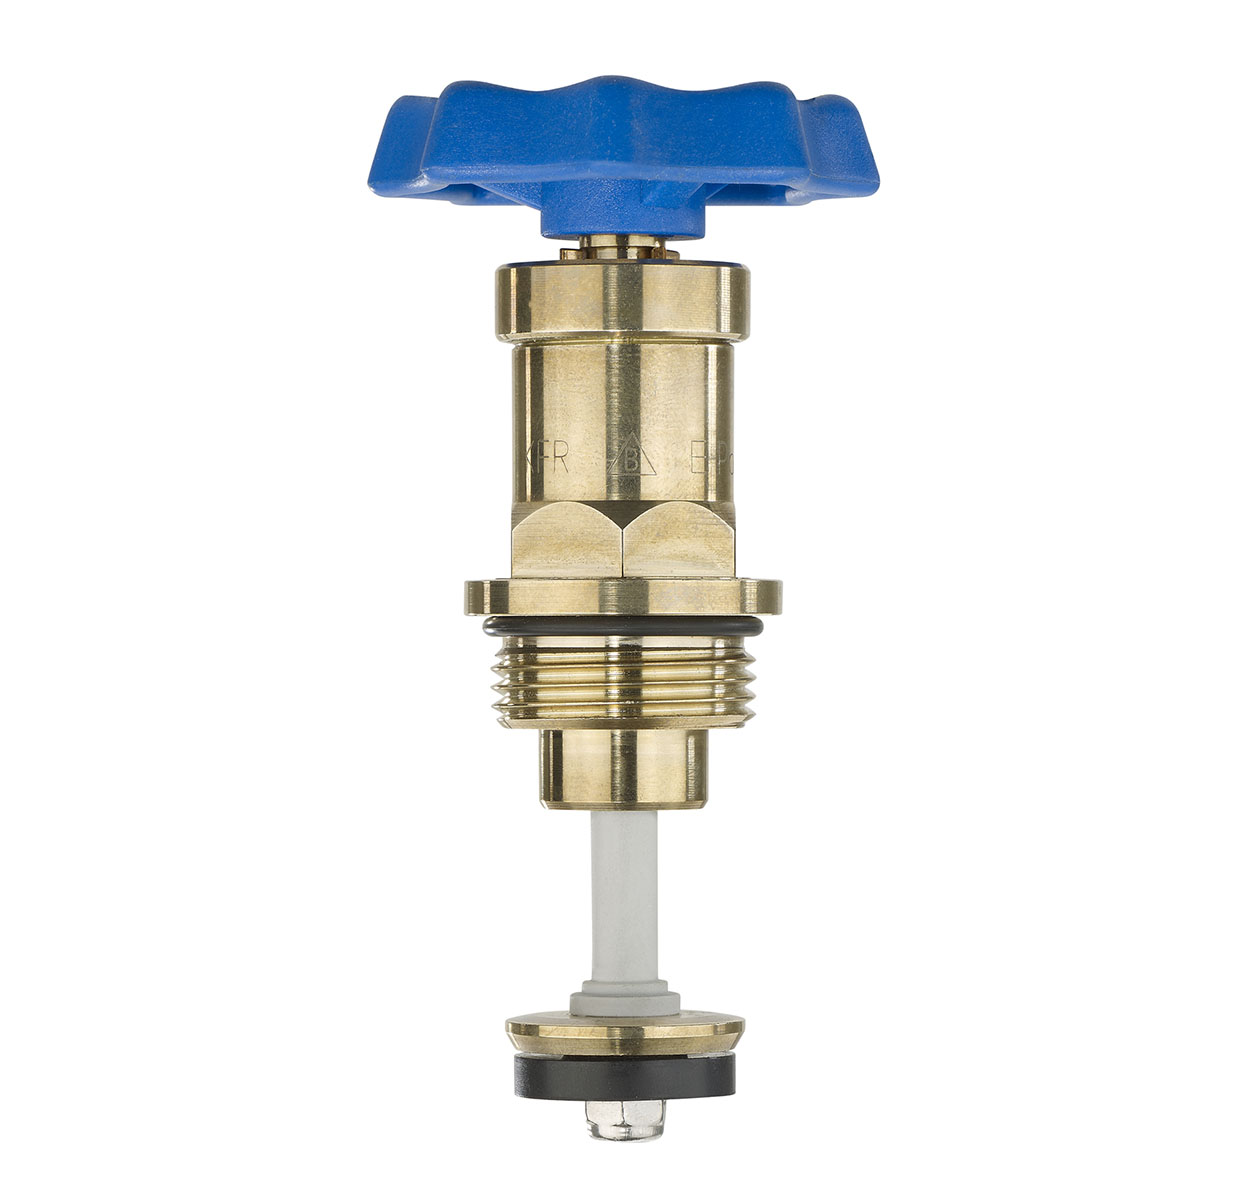 7515150 - long-life ECOCAST upper-part with grease chamber Long-life, for Combined Free-flow and Backflow-preventer valves